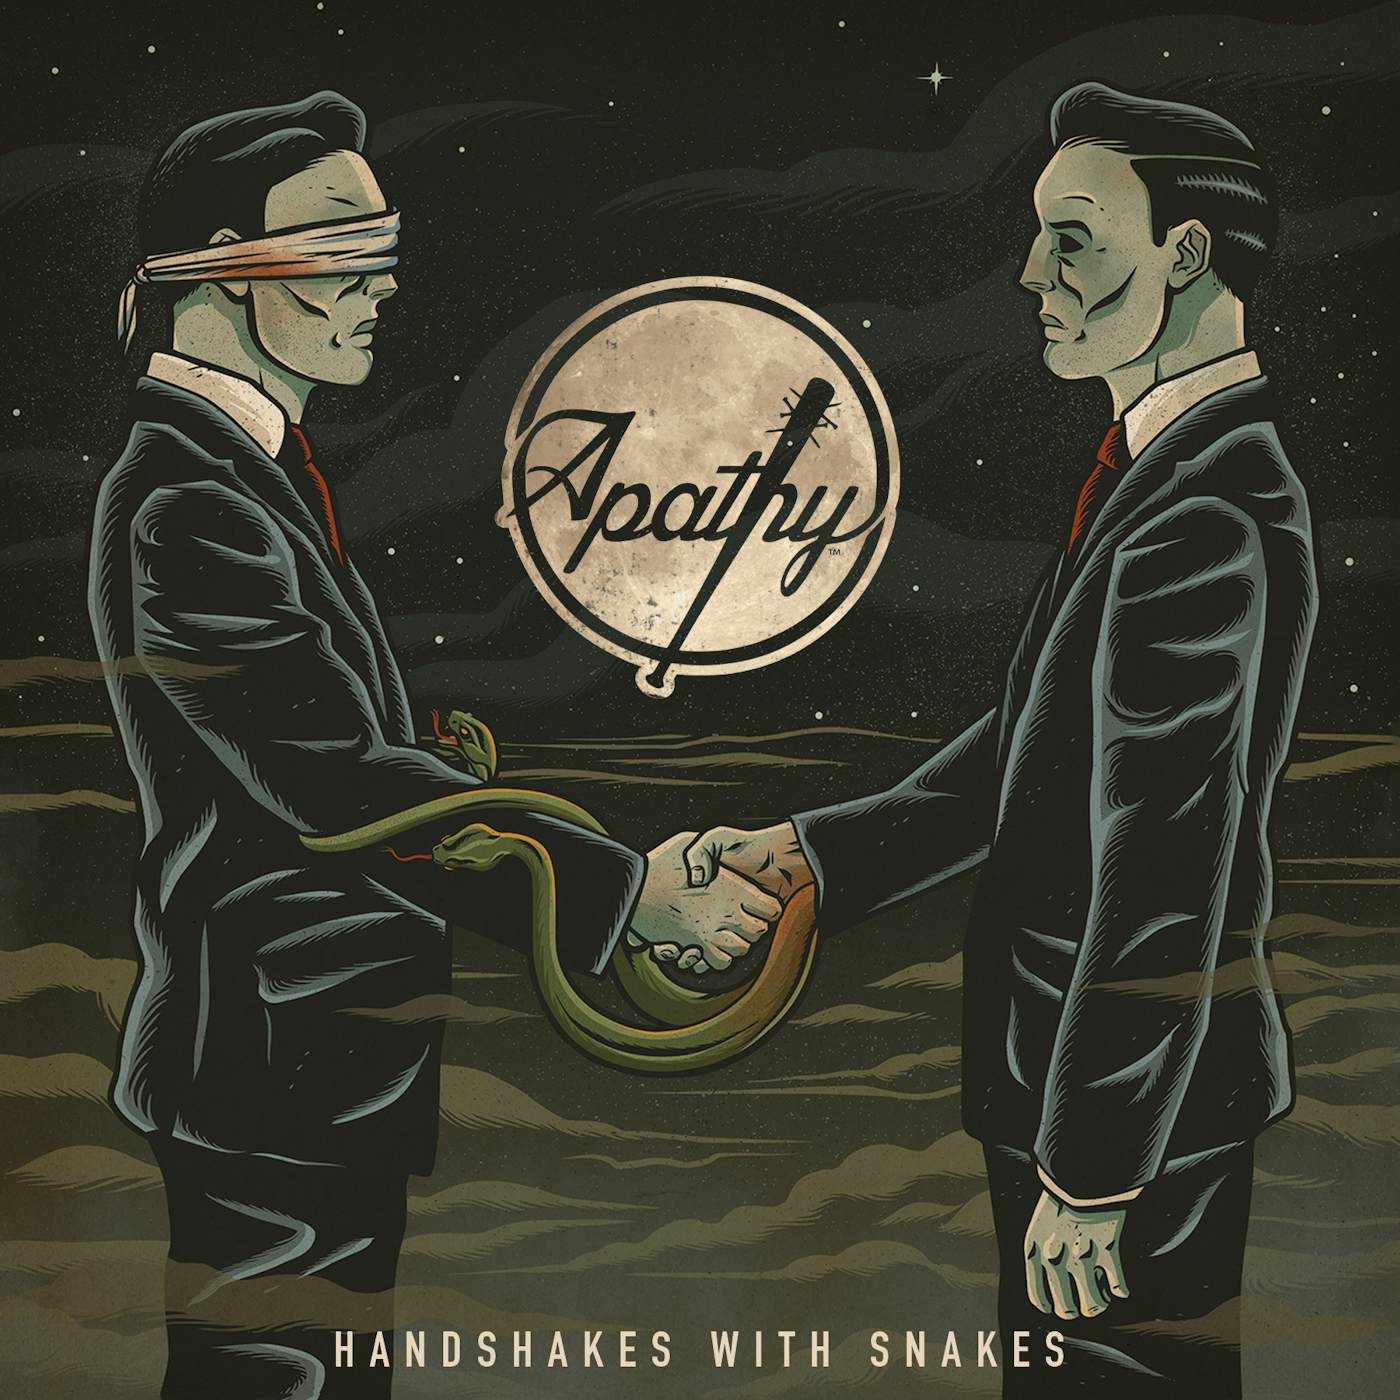 Apathy Handshakes with Snakes Vinyl Record